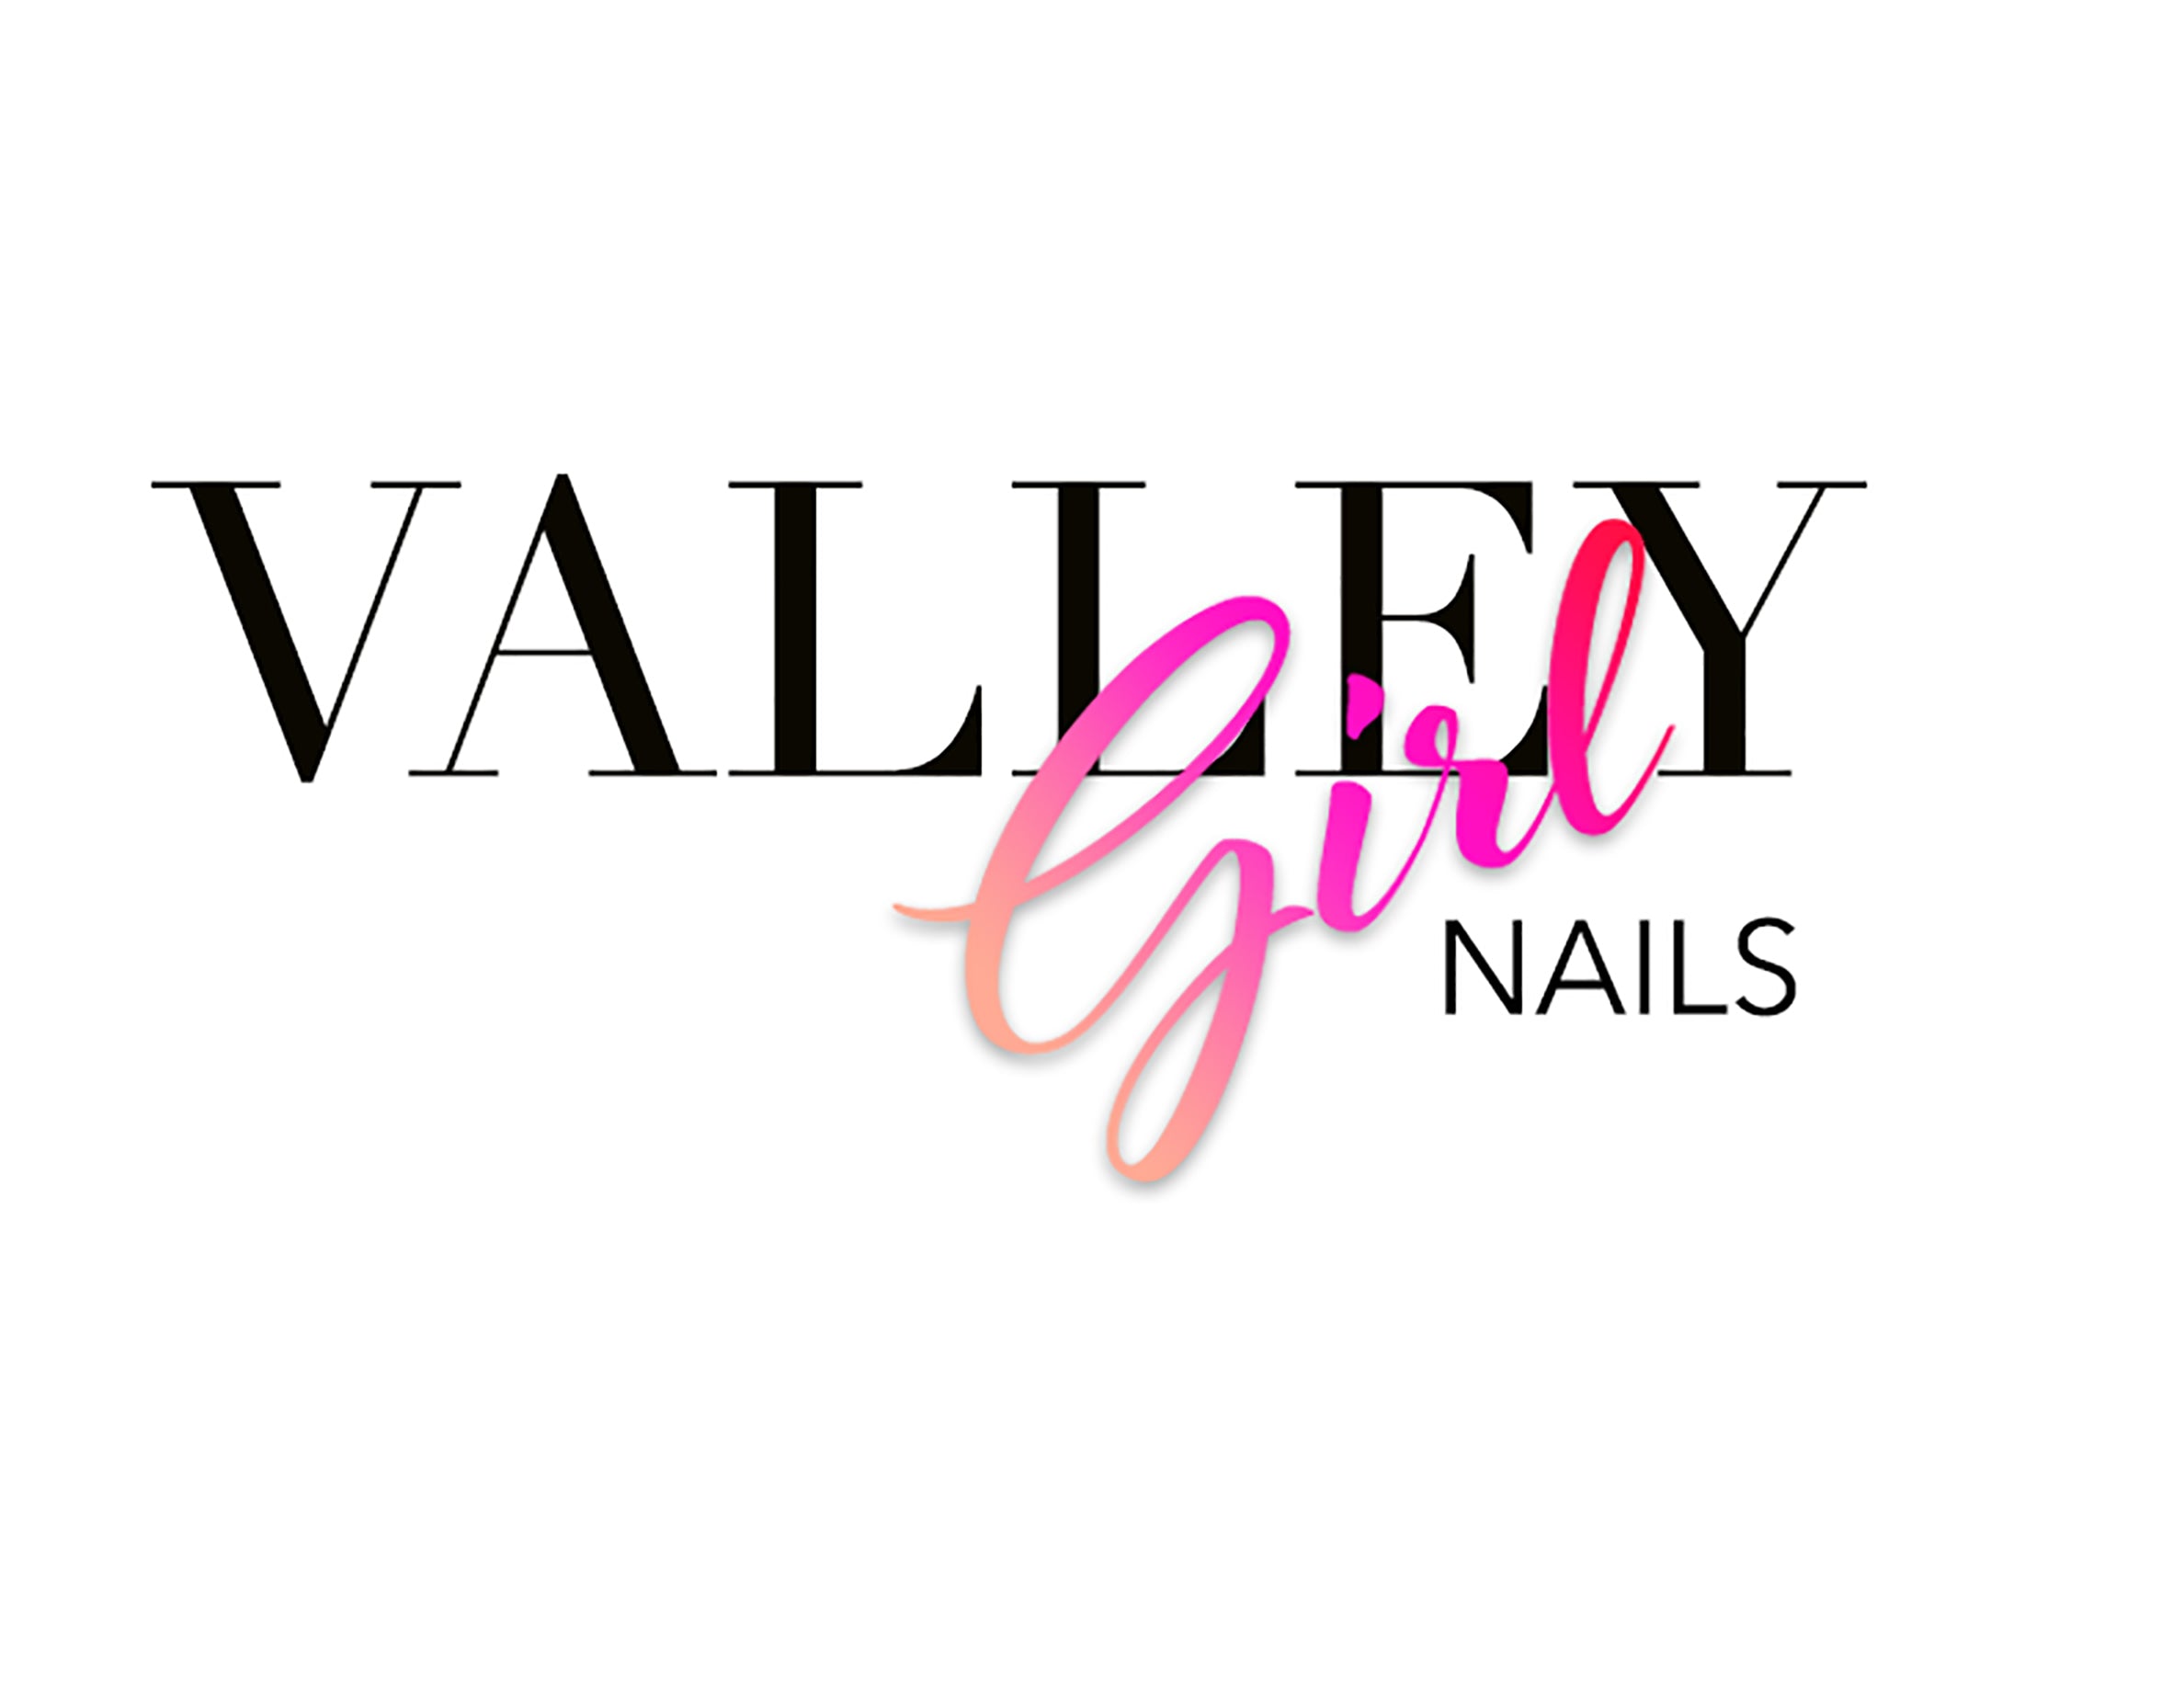 Valley Girl Nails